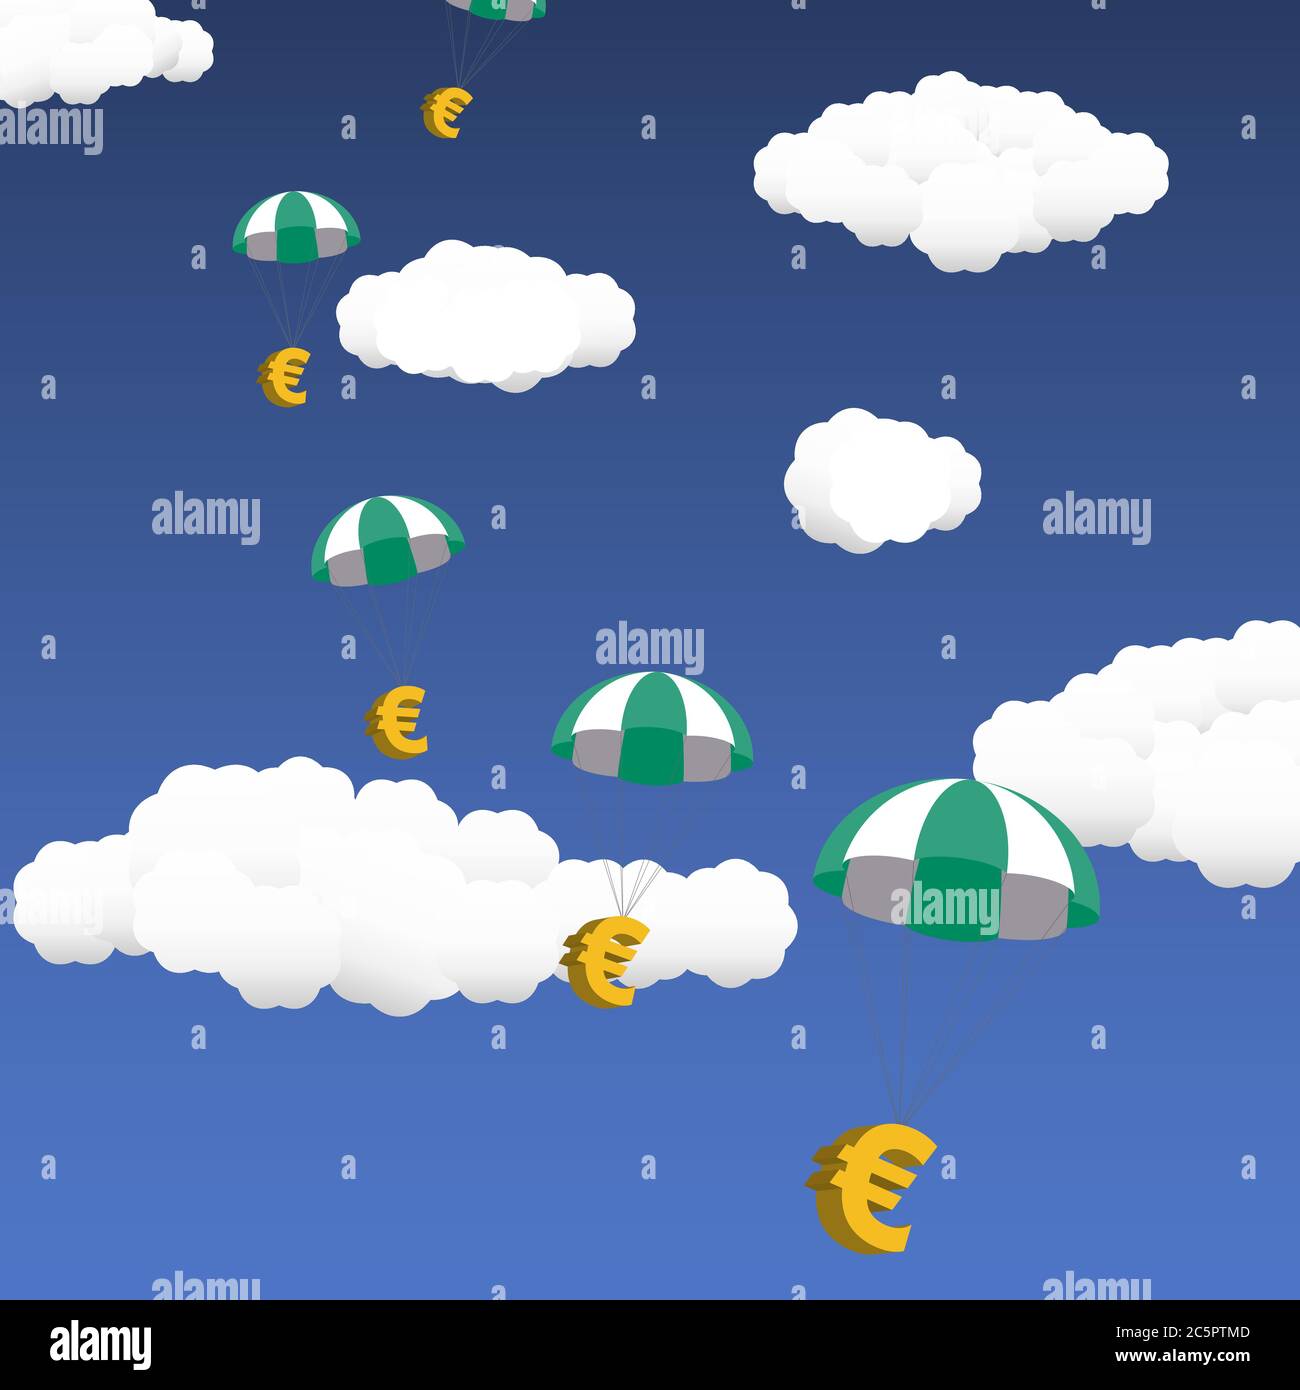 Portrait Version of Euro money parachuting to stave recession through stimulus in EU countries. Stock Vector